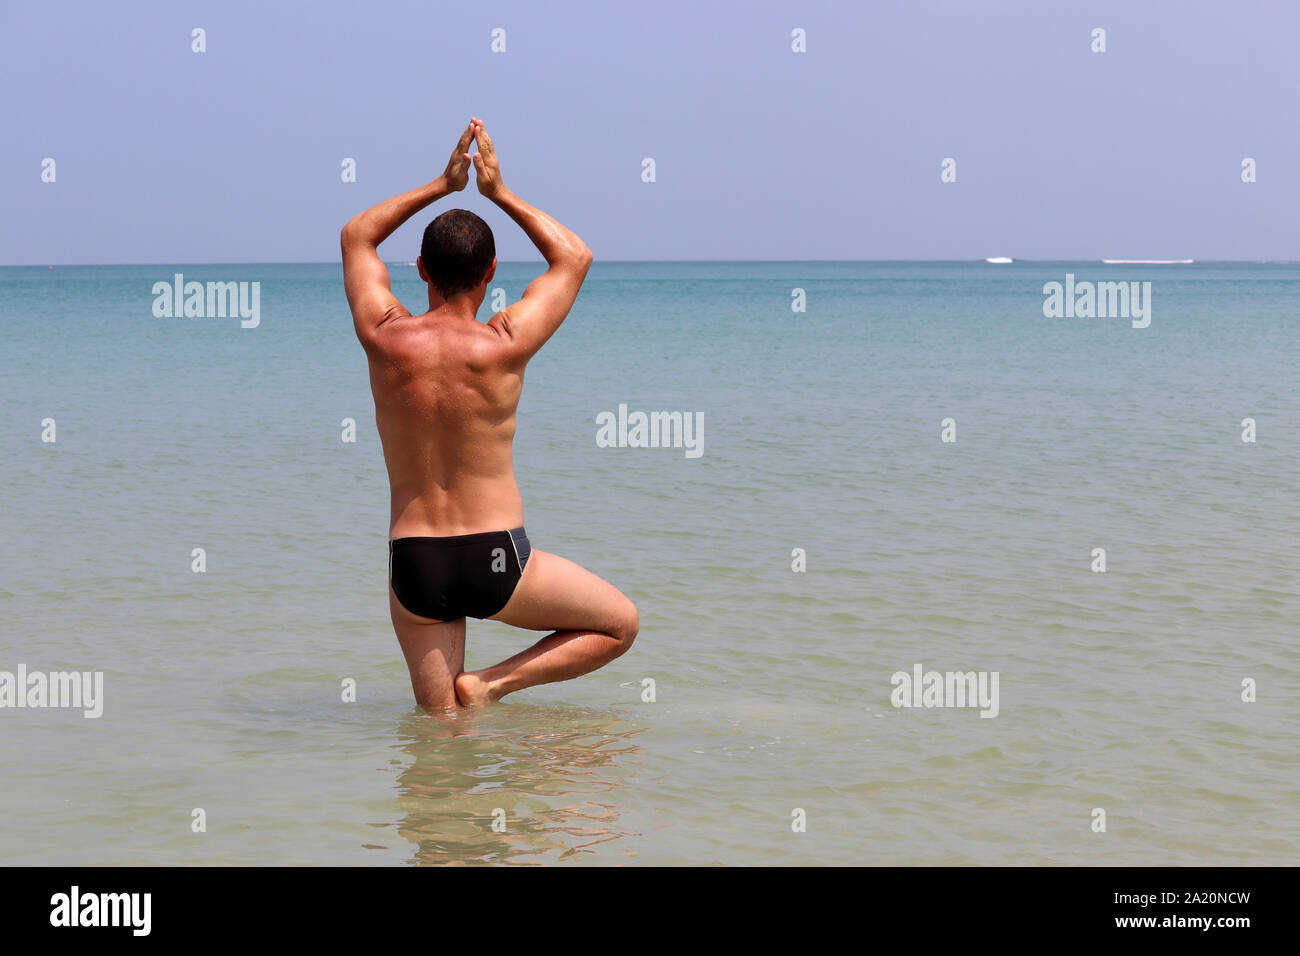 Yoga on the beach, man stands in a tree pose in the blue water of tropical sea. Balance with nature, fitness, relaxation and exercise at vacation Stock Photo